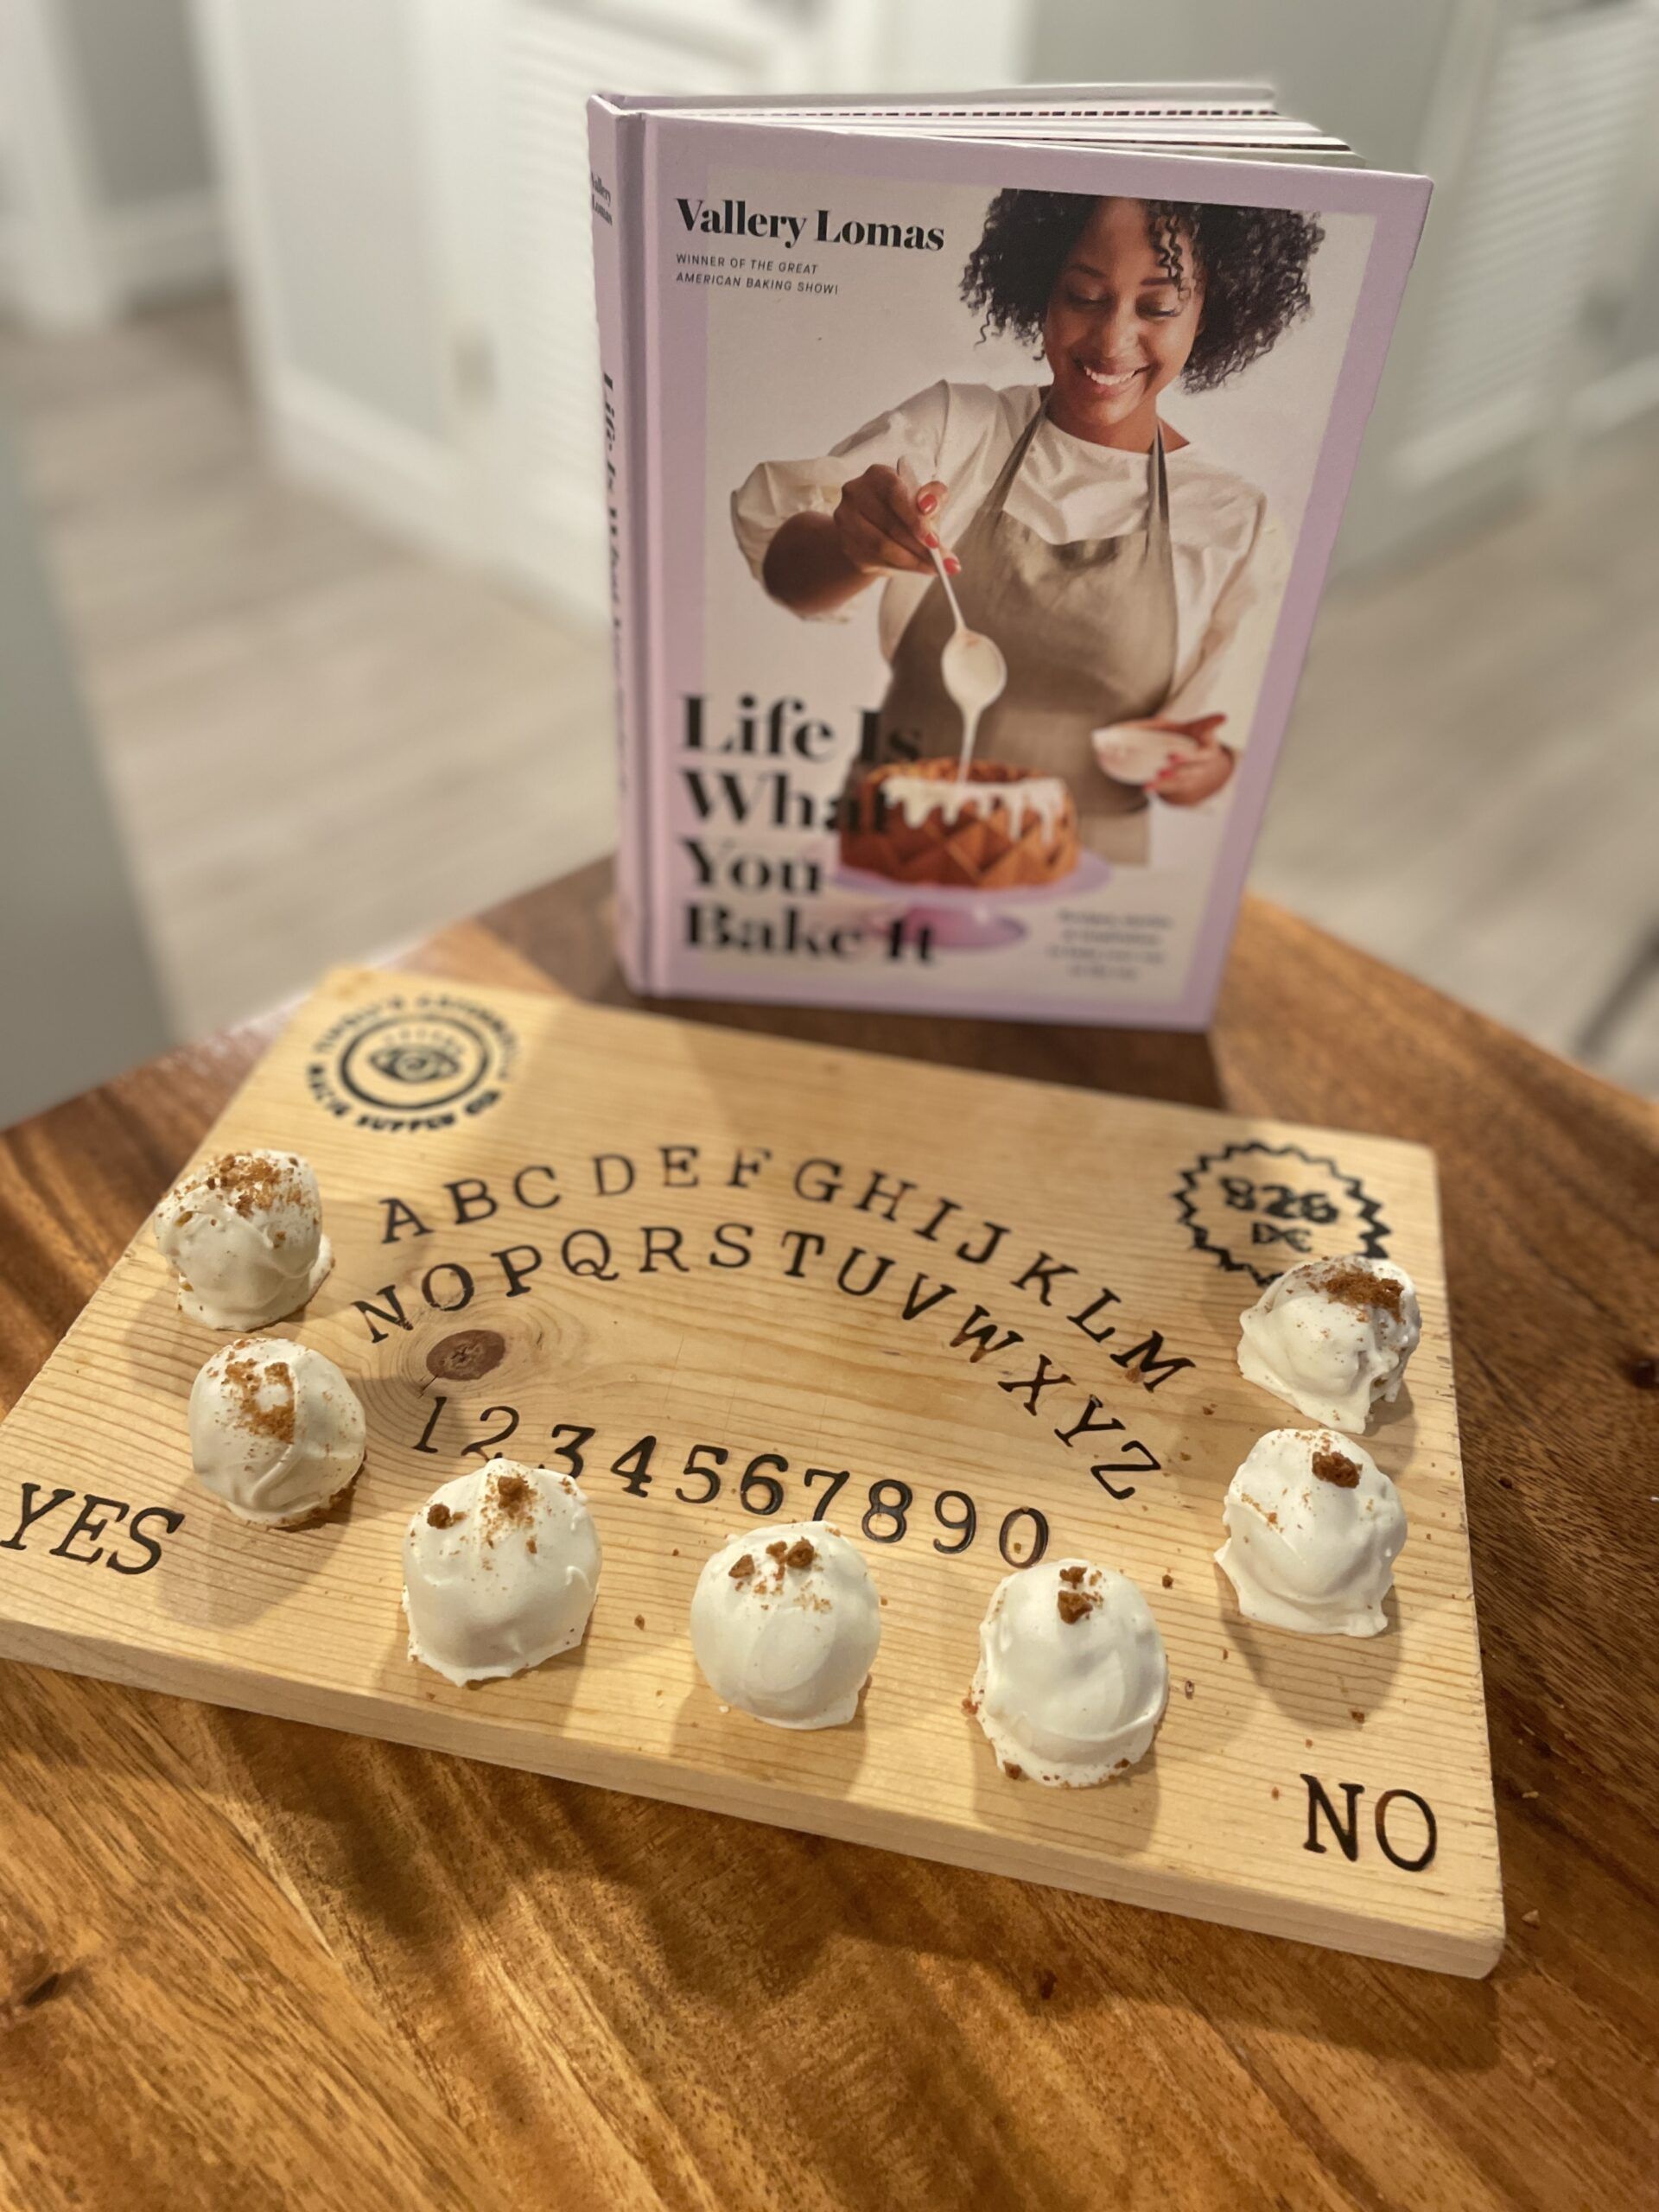 Seven white chocolate covered truffles sprinkled with gingersnap crumbs on a wooden ouija cutting board on a wooden table next to the cookbook Life is What You Bake It